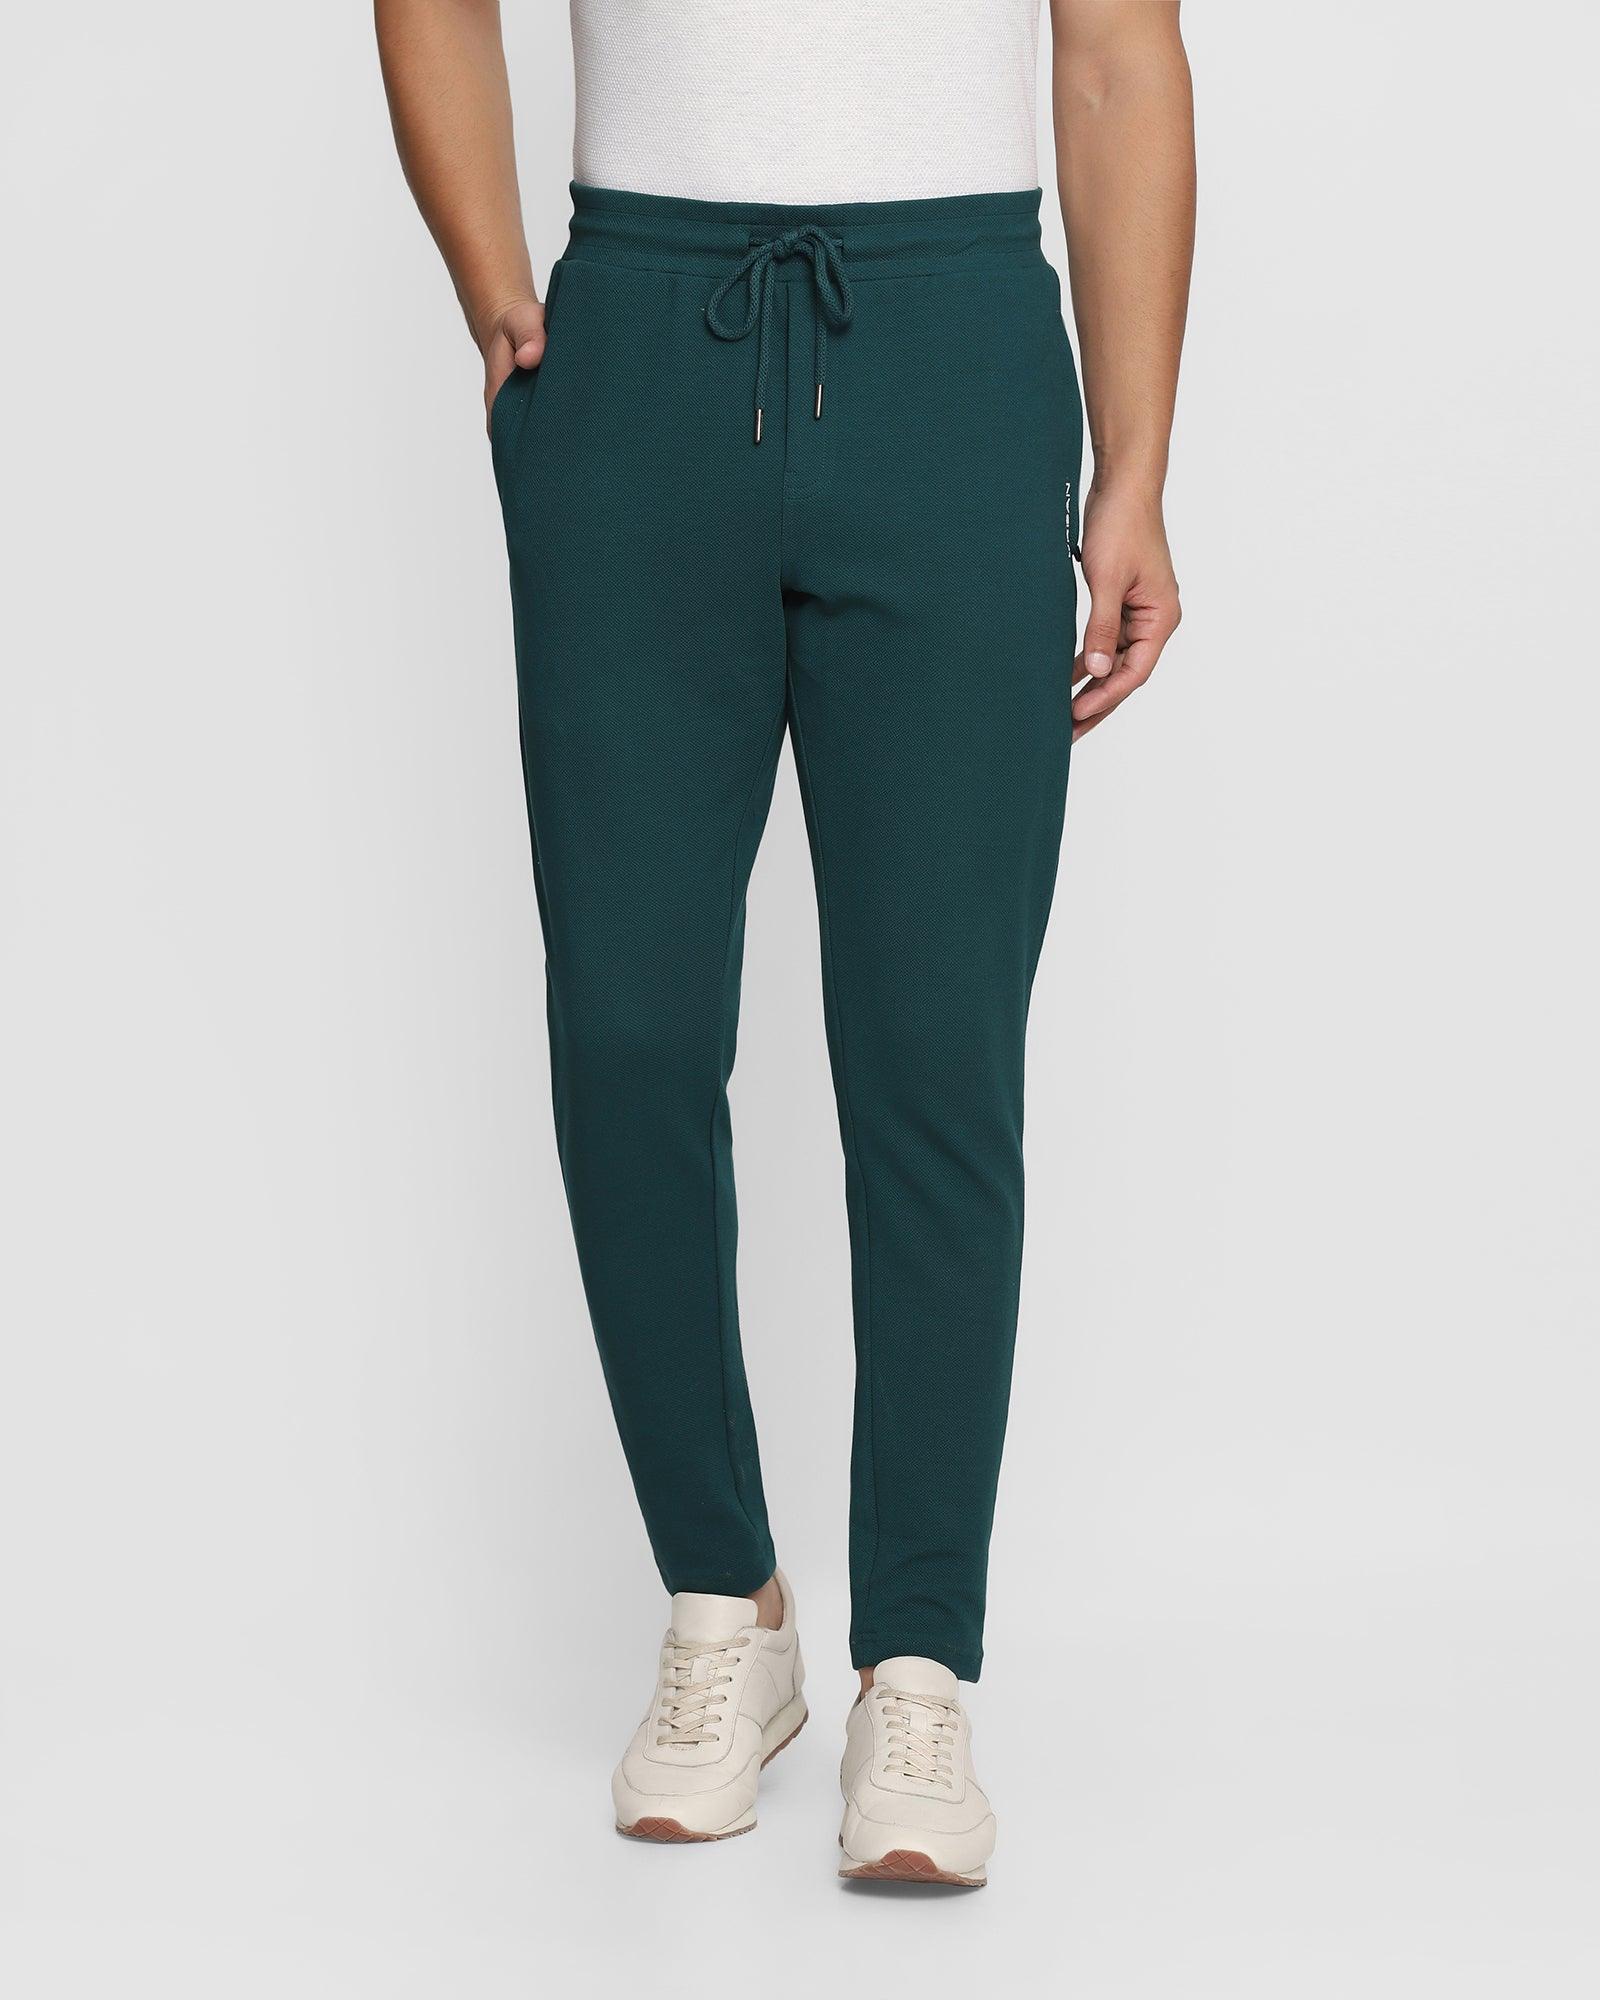 casual teal solid jogger - champ